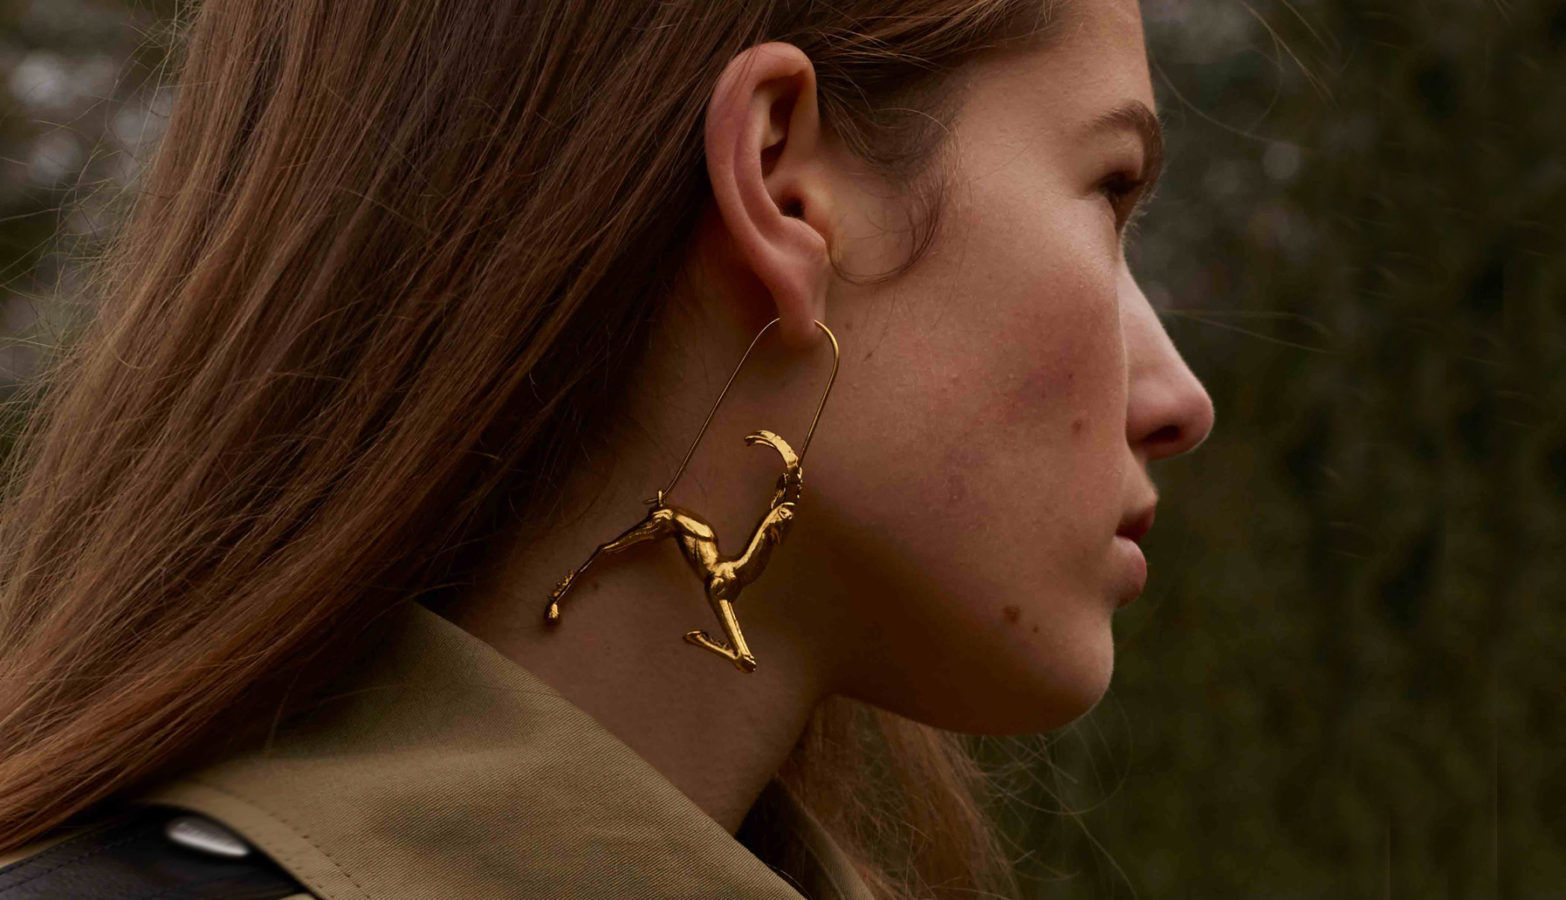 6 zodiac jewellery pieces that double as lucky charms